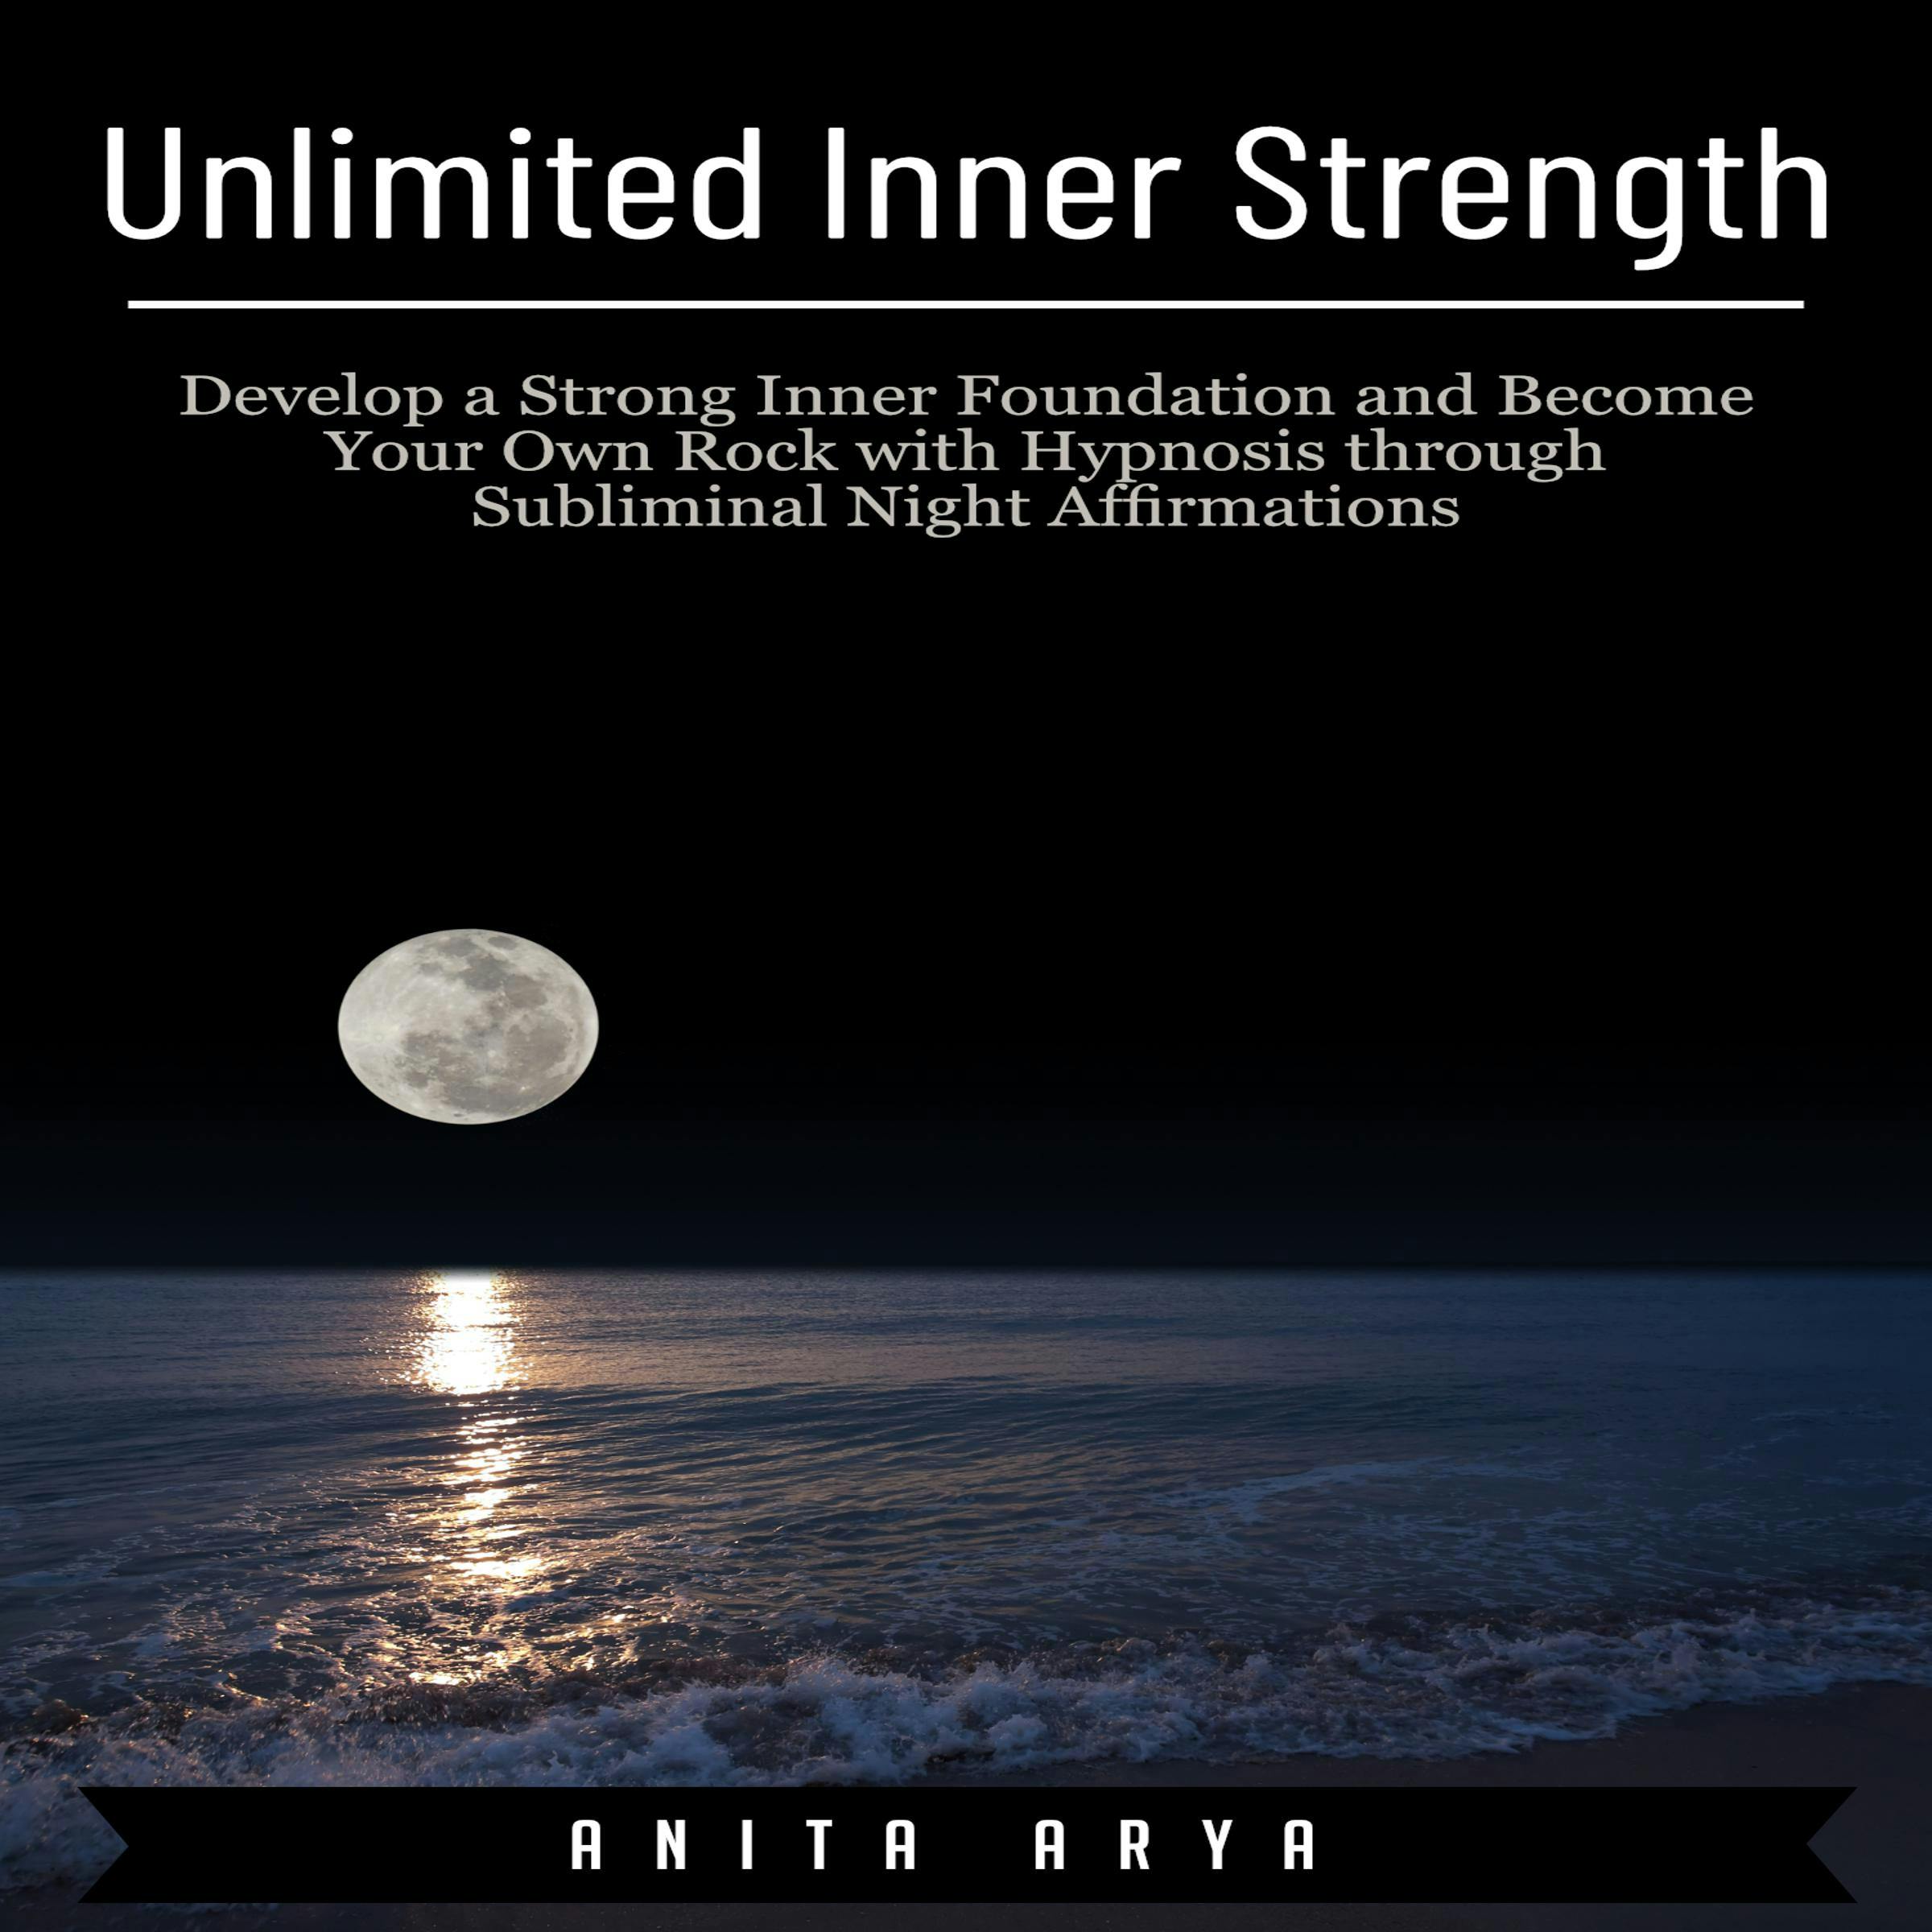 Unlimited Inner Strength: Develop a Strong Inner Foundation and Become Your Own Rock with Hypnosis through Subliminal Night Affirmations - Anita Arya